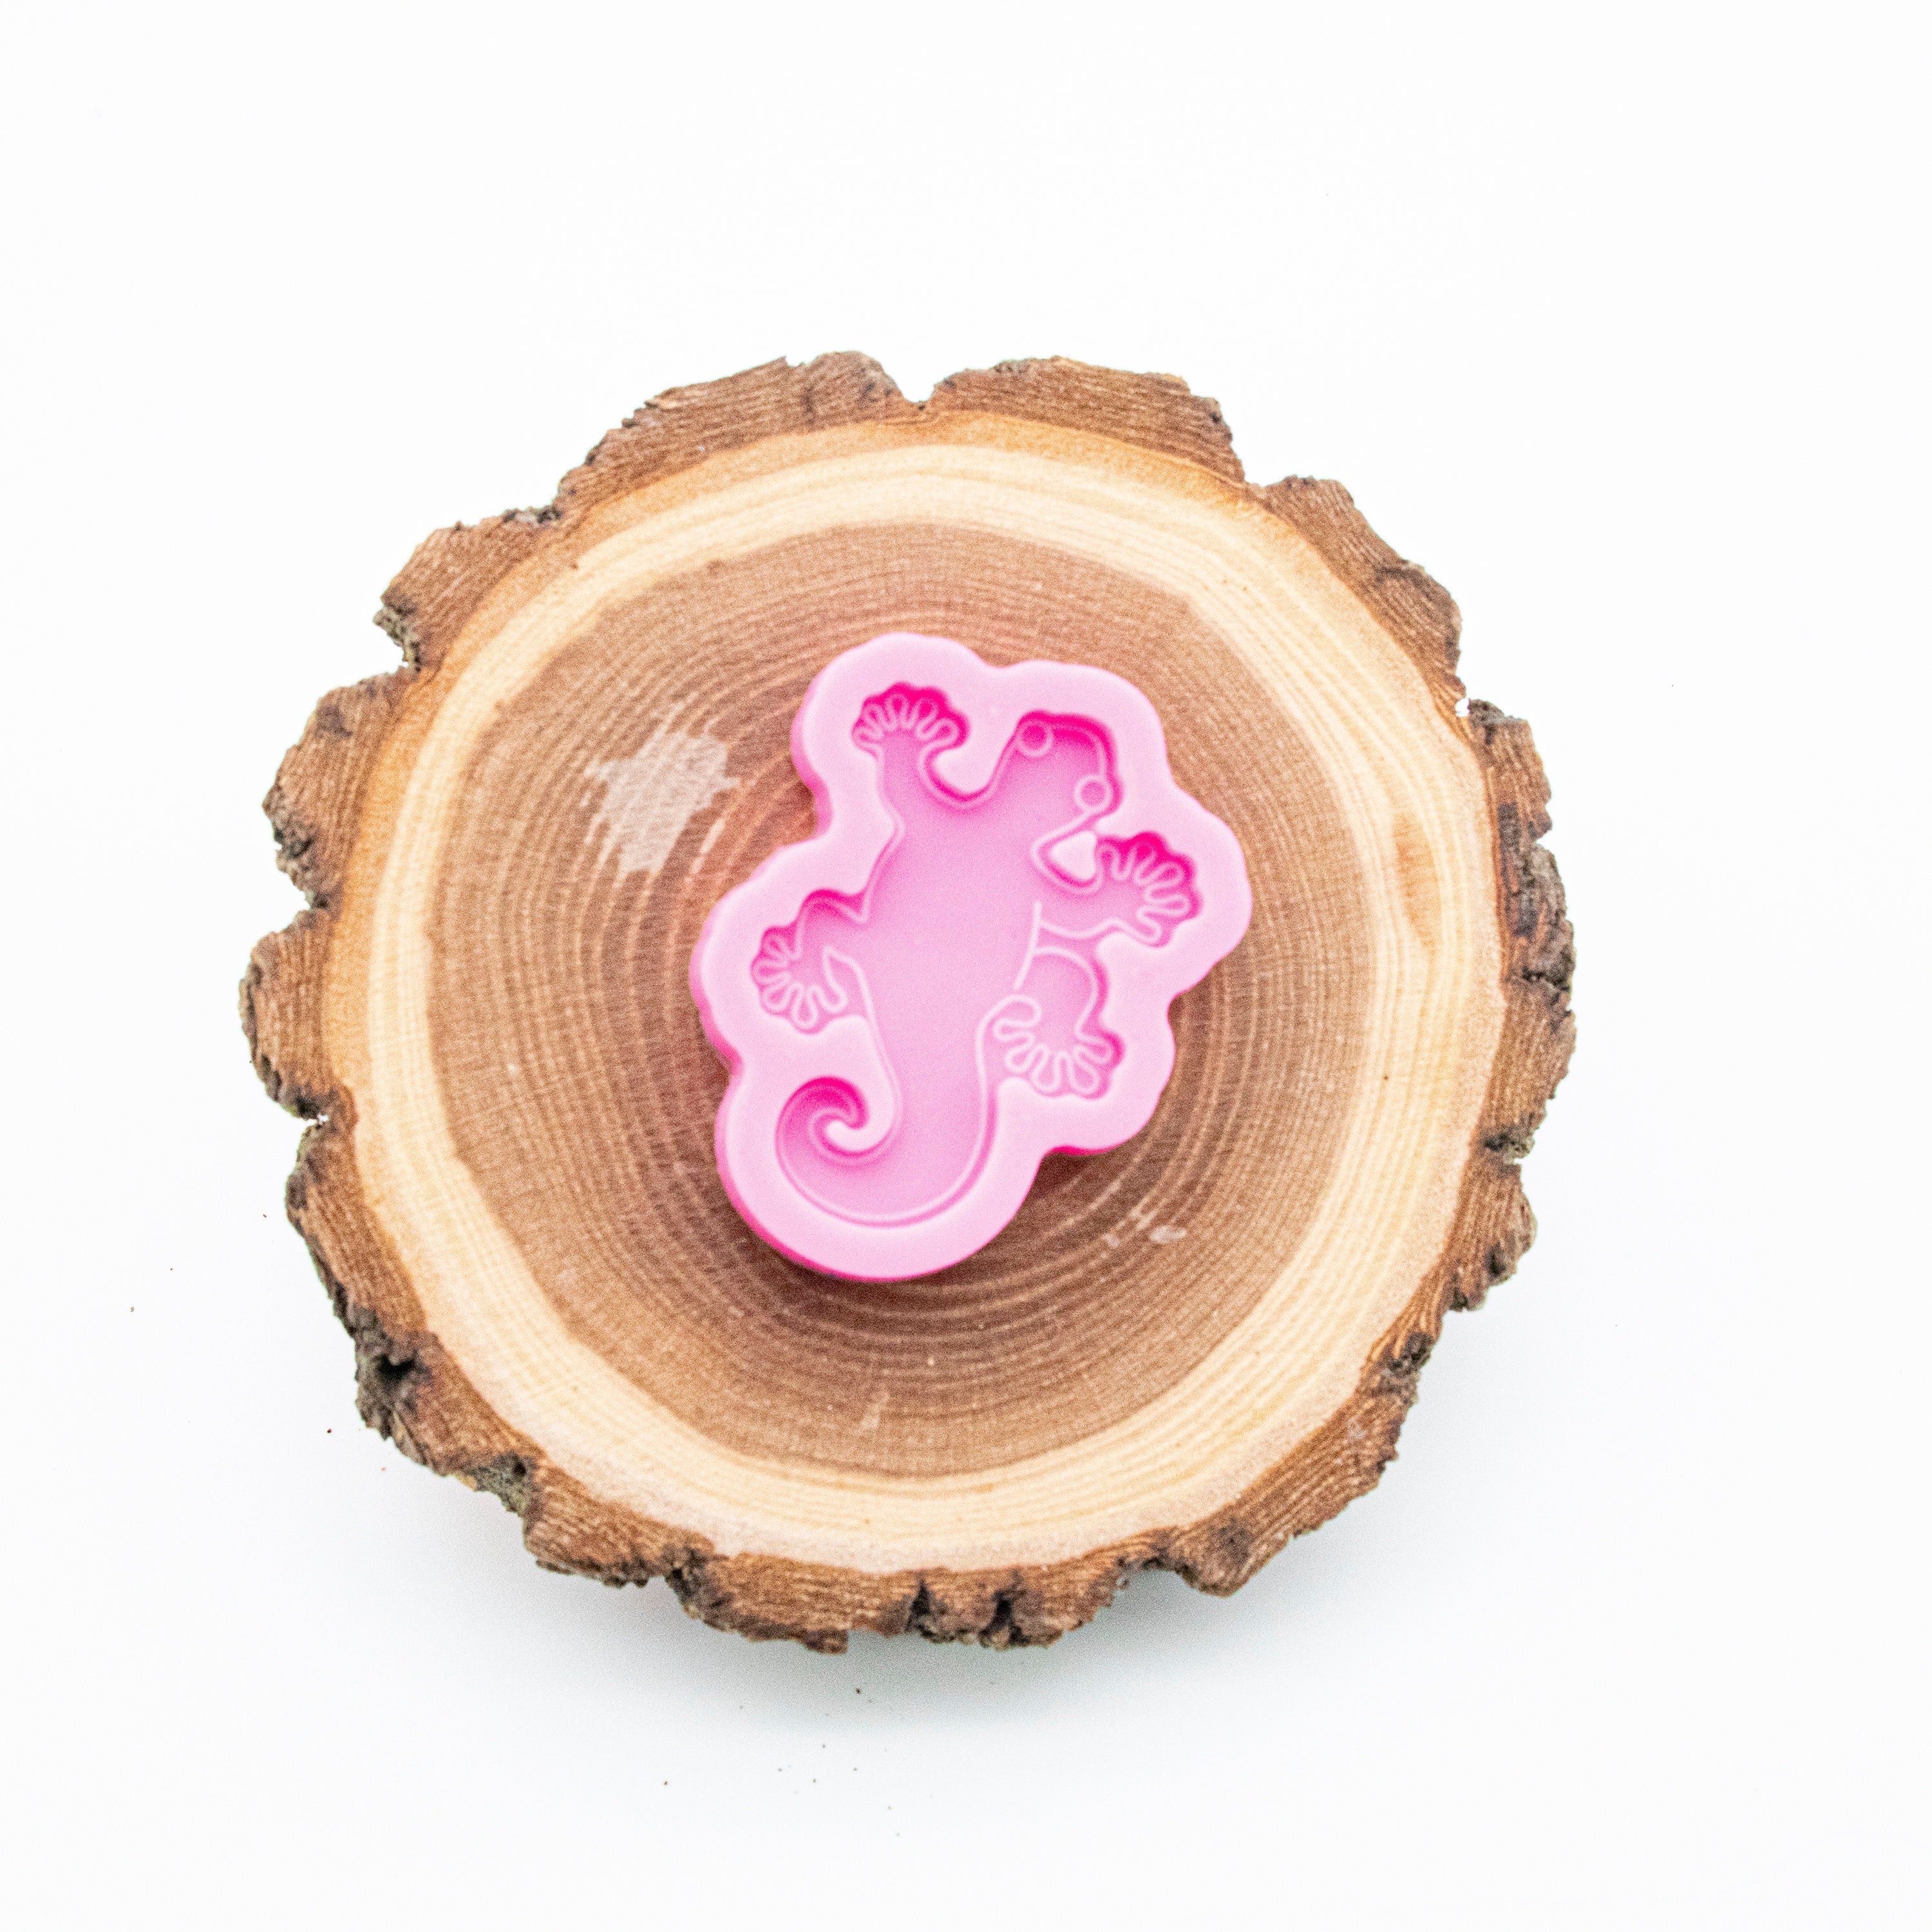 Lizard Shiny Silicone Mold for Epoxy Resin Keychain - Jewelry Making - Ornament Silicone Mold